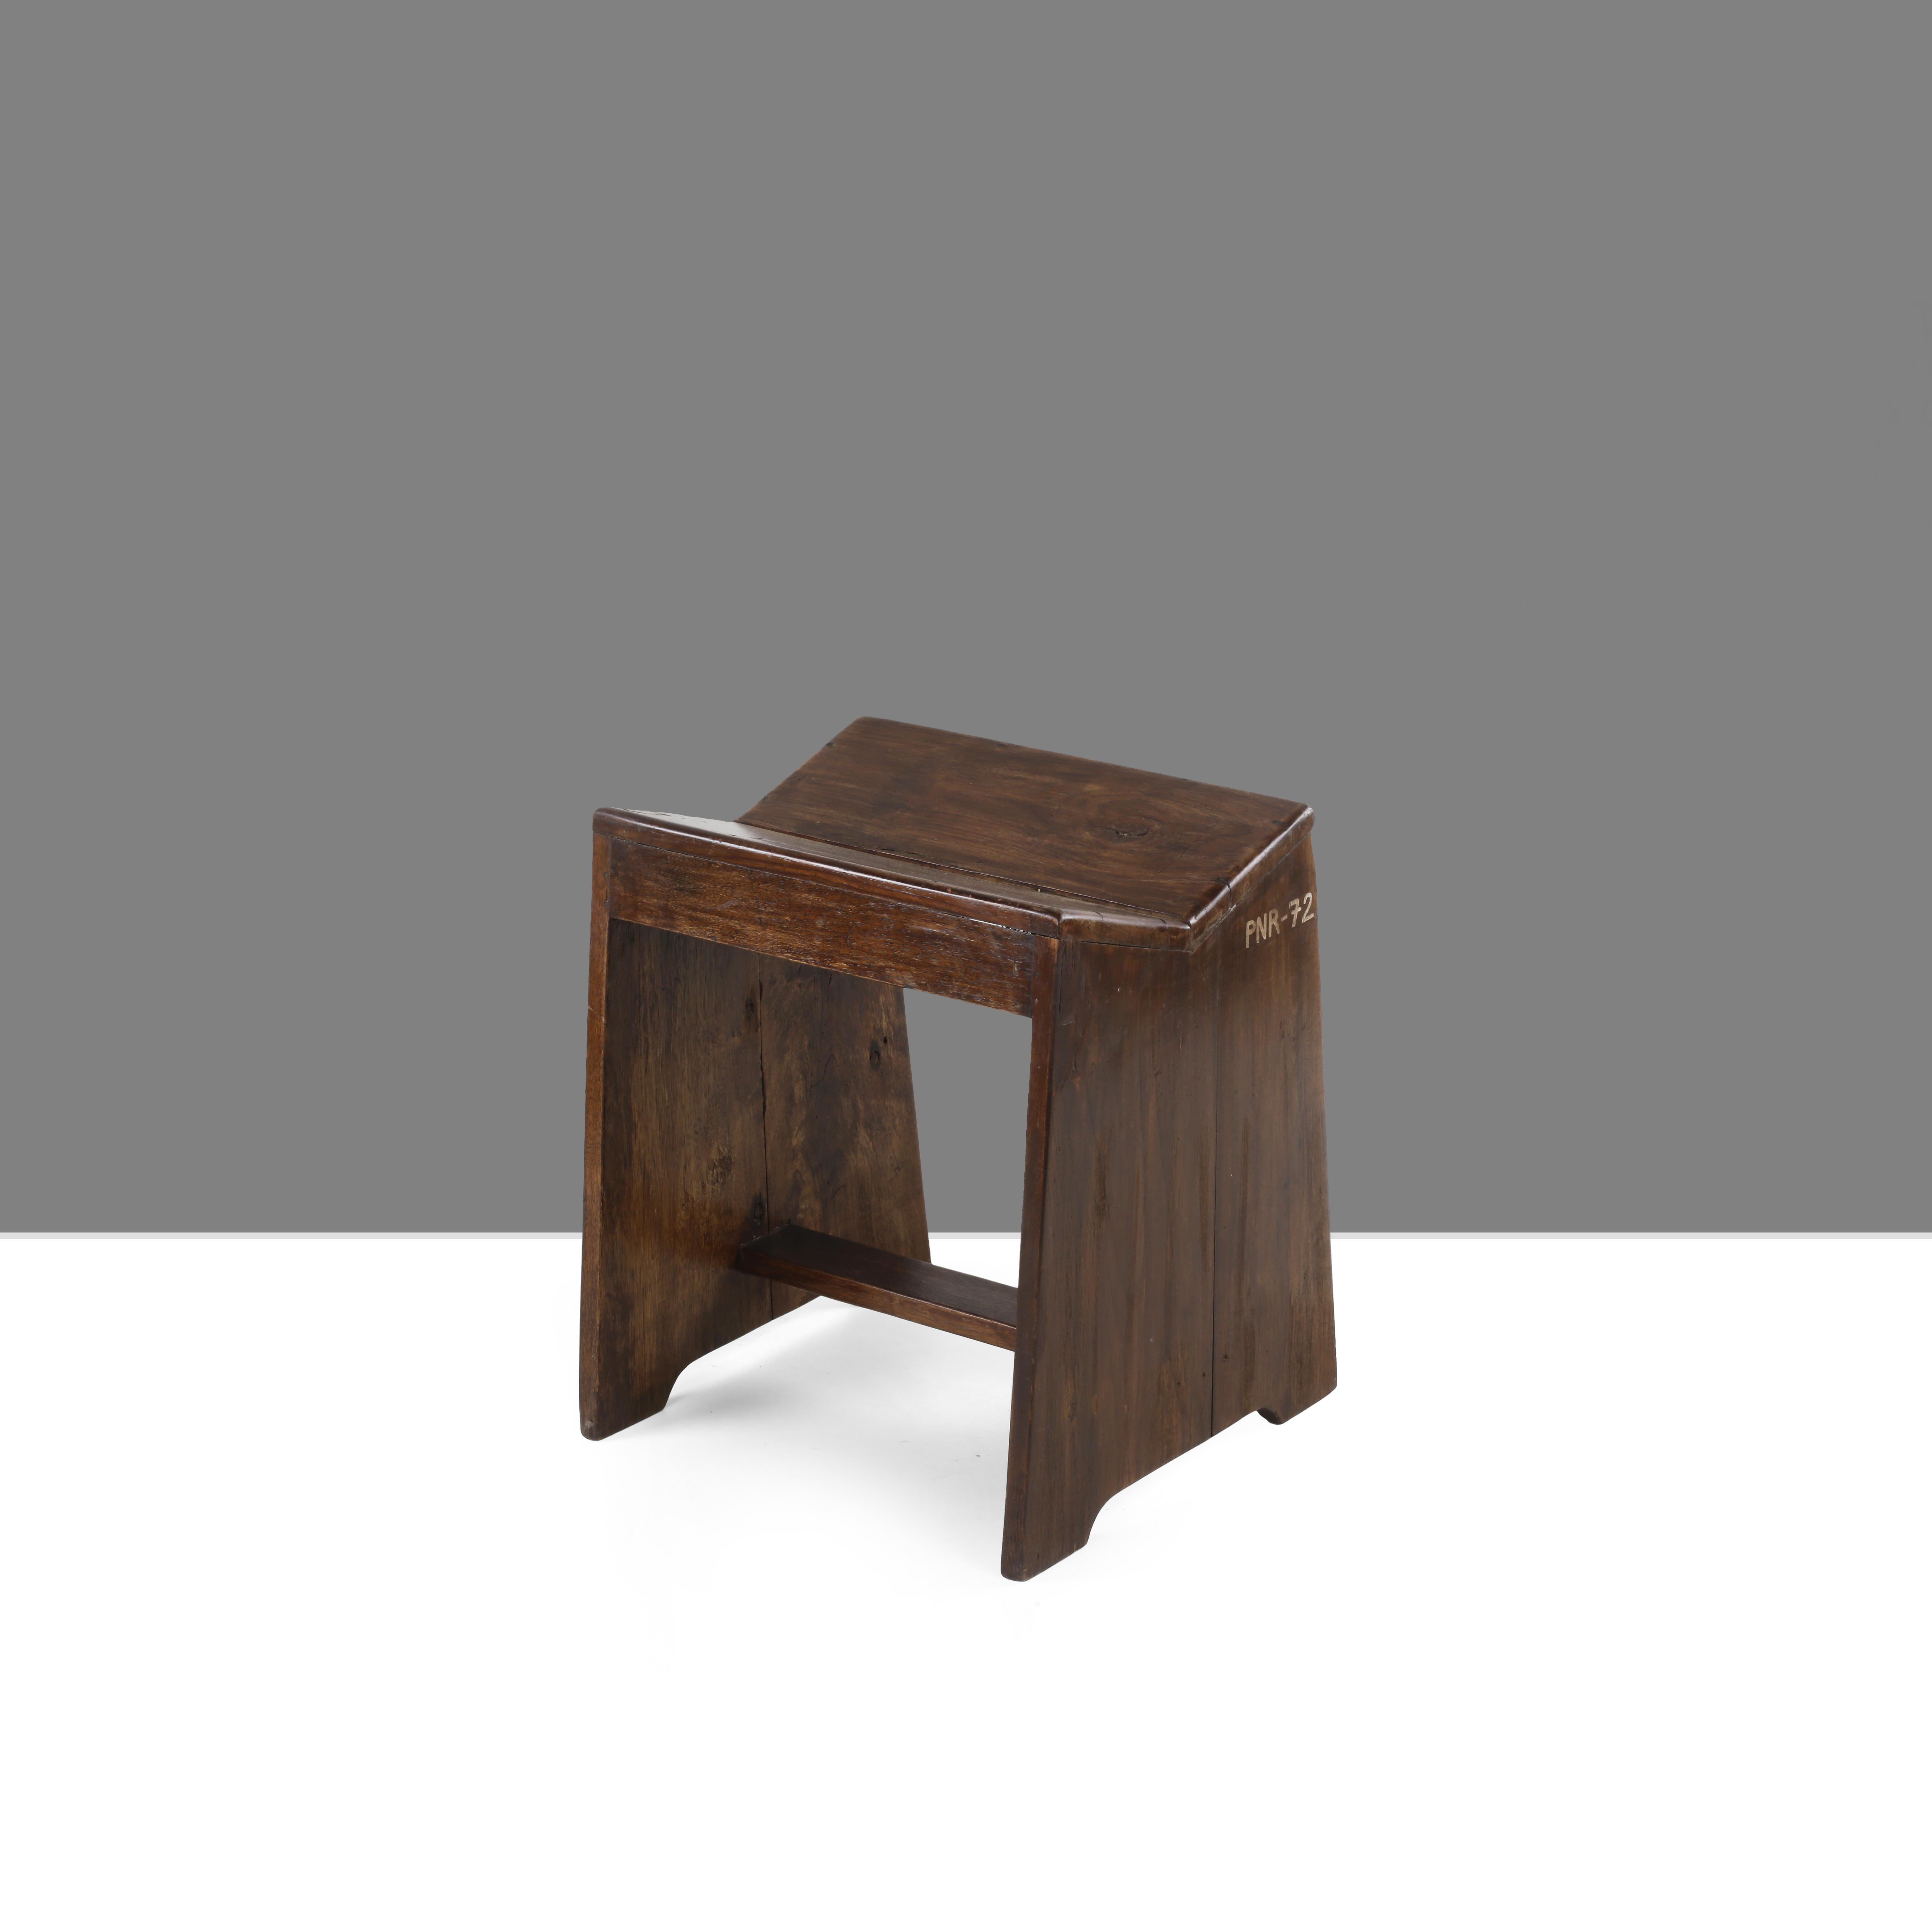 Extremely rare sawing stool is not only a fantastic piece, it’s a rare collectors item. It is raw in its simplicity, embodying an expressing a nonchalance. It is a beautiful piece that could be put in a bedroom, in a walk way or as additional object